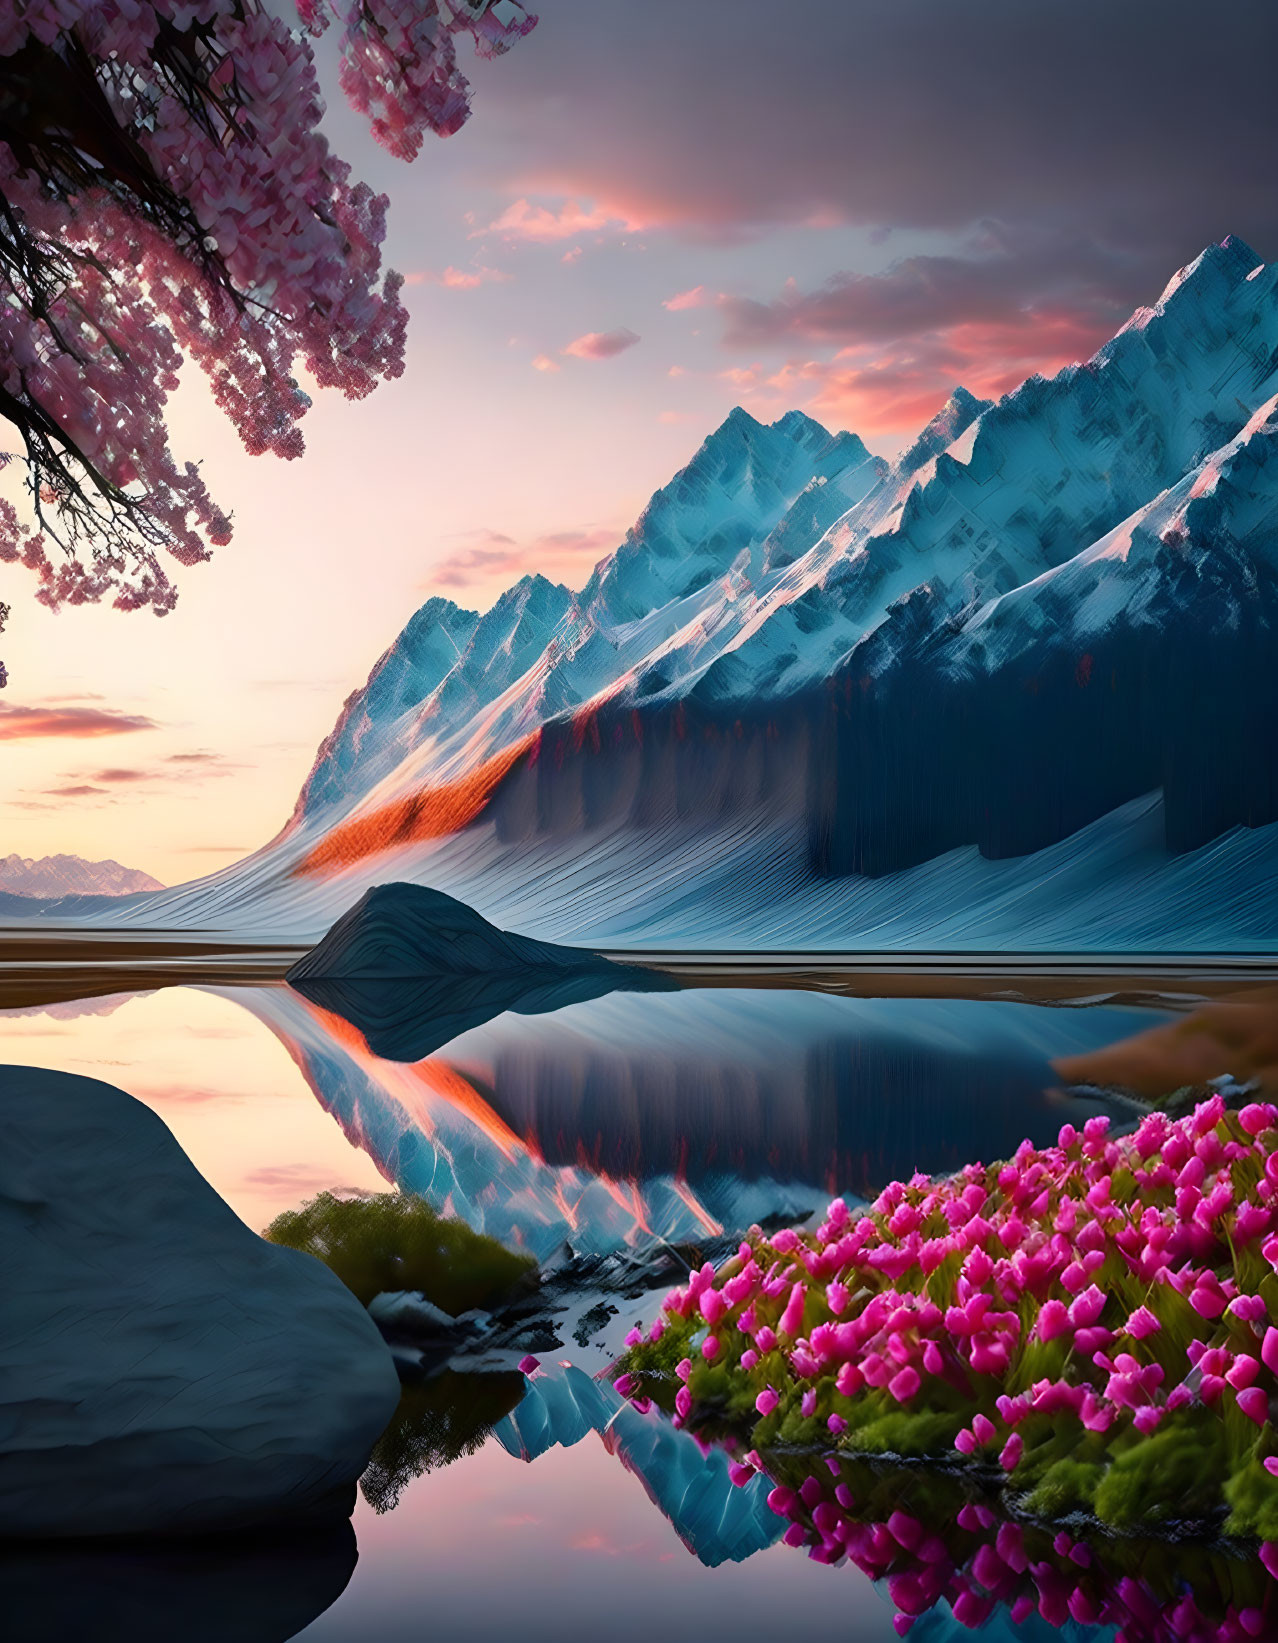 Scenic snow-capped mountains, lake reflection, cherry blossoms, sunset sky